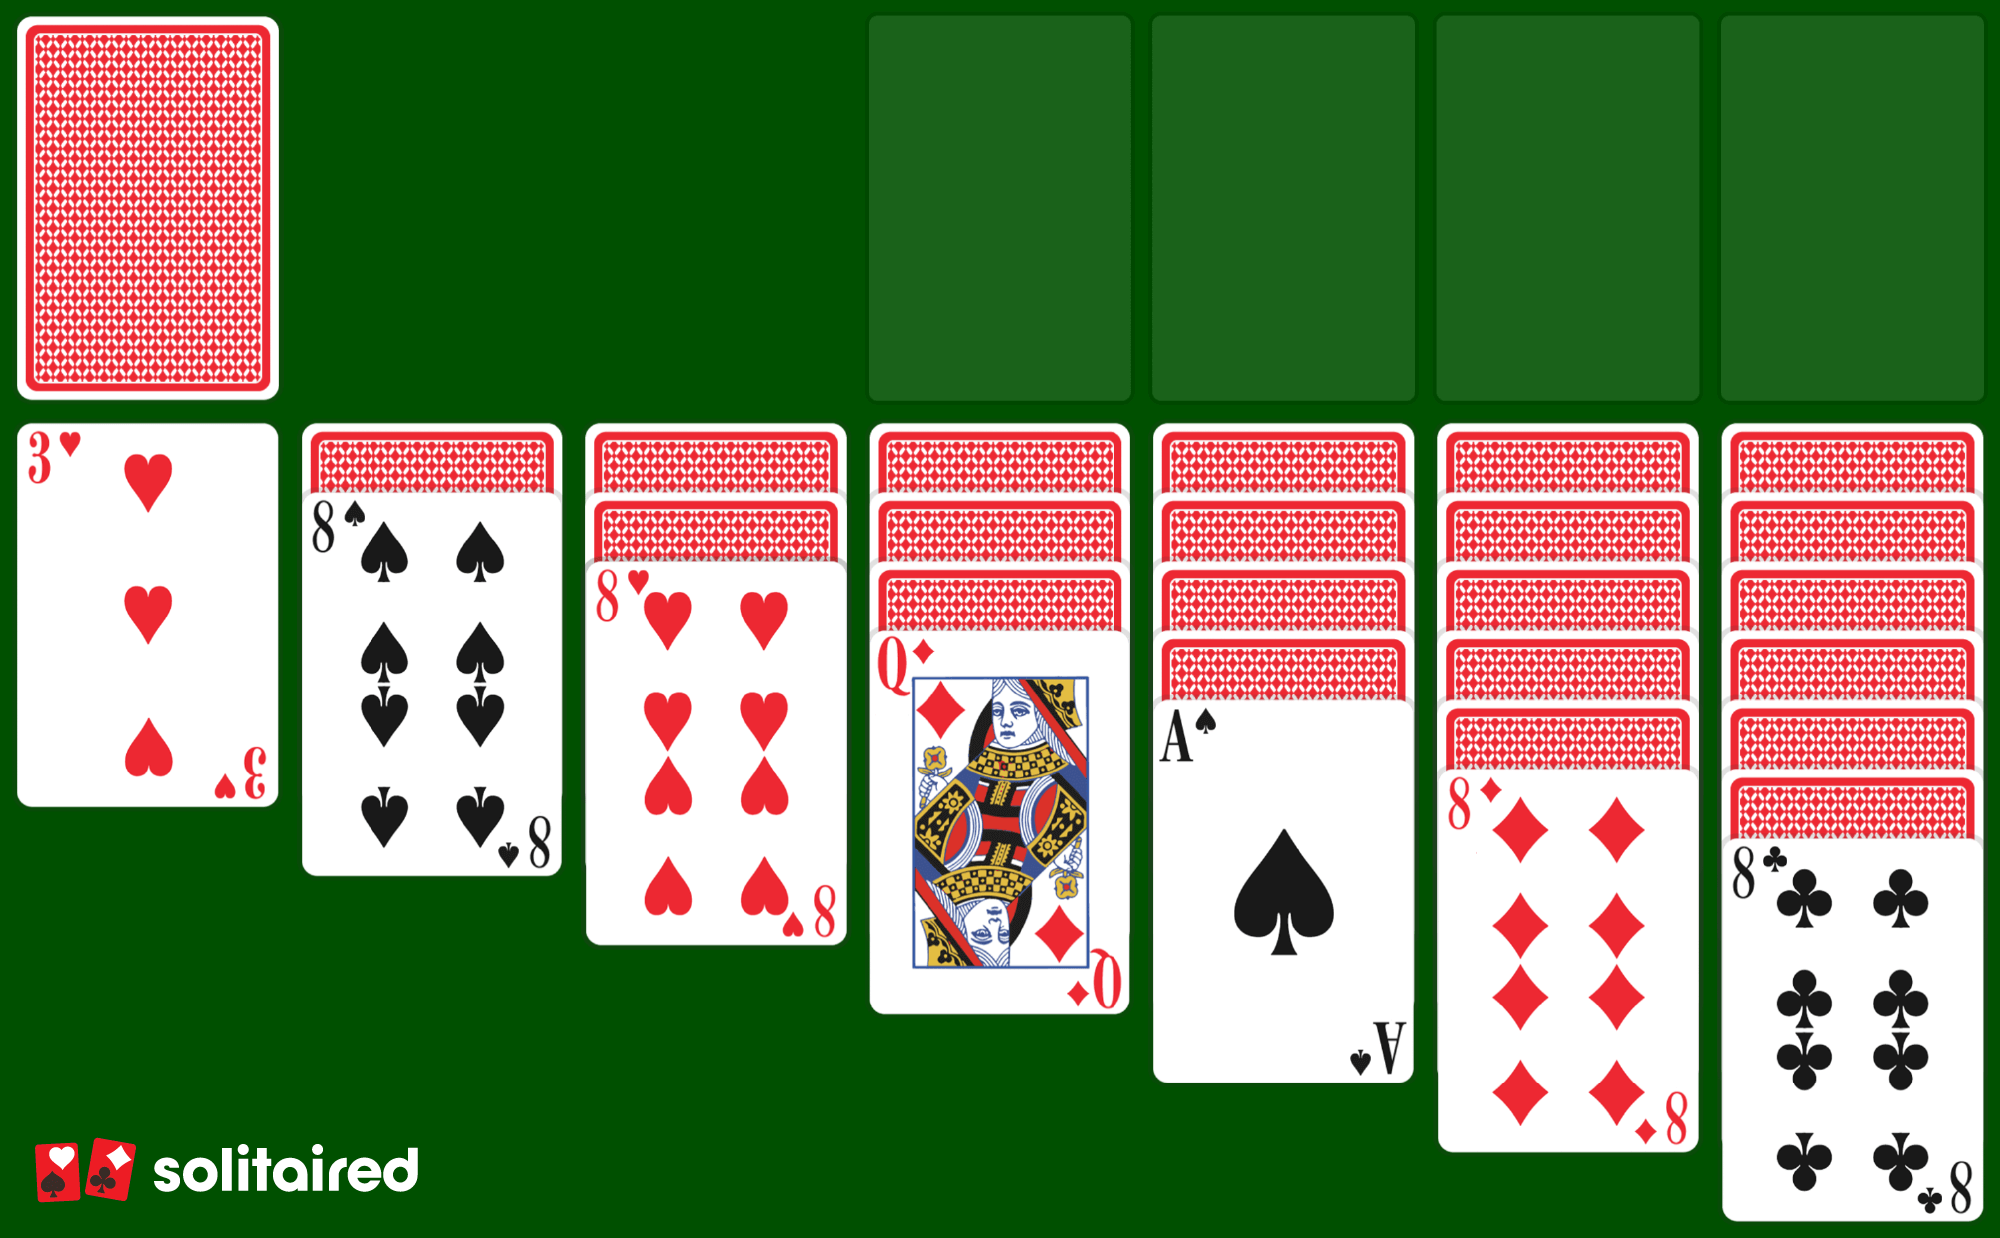 play classic solitaire